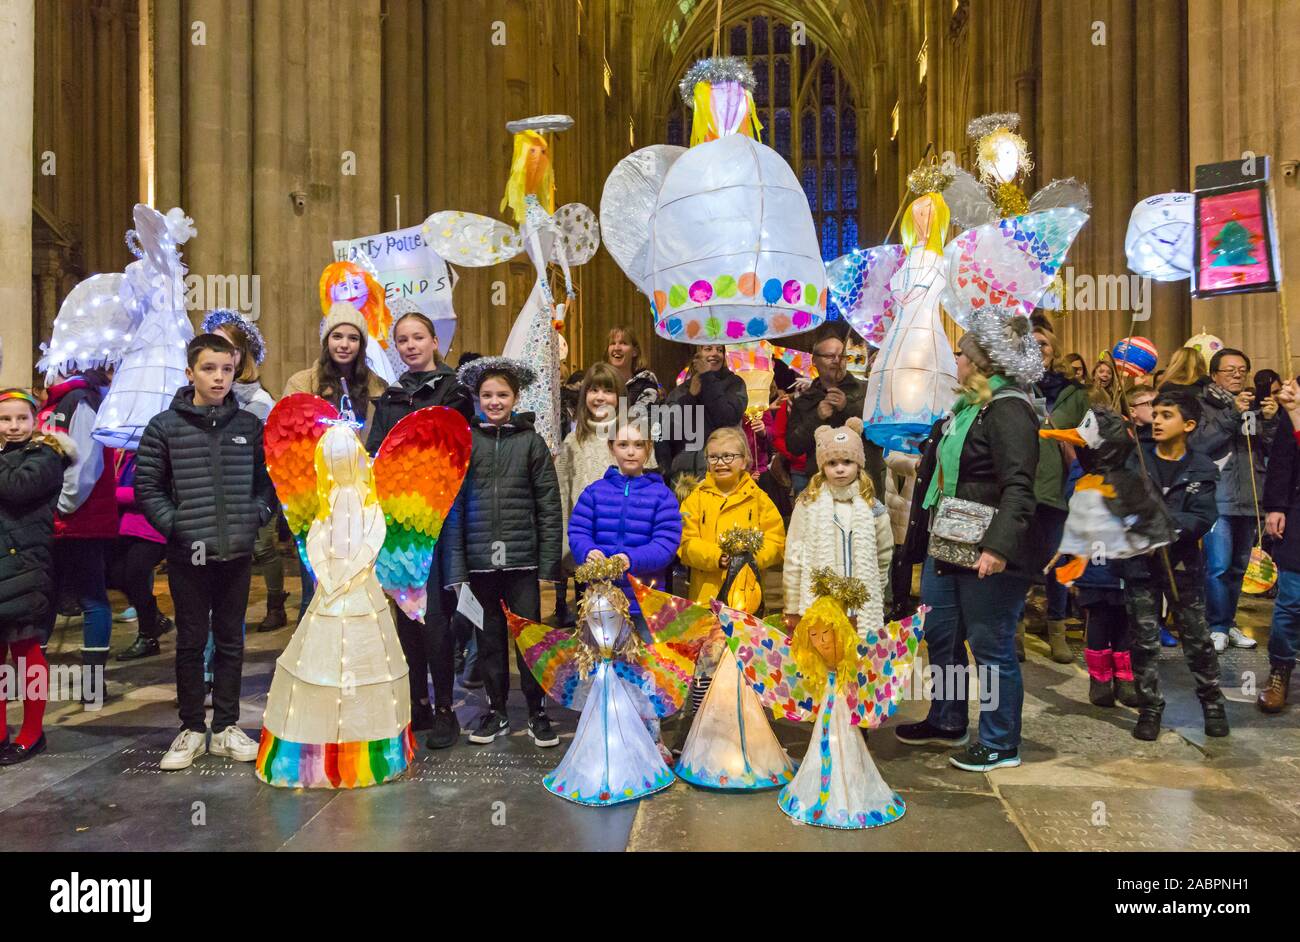 Winchester, Hampshire, UK. 28th November 2019. Crowds flocks to Winchester  for the Winchester Christmas Lantern Parade, to show the wonderful lanterns  they have created or to watch the parade which starts and